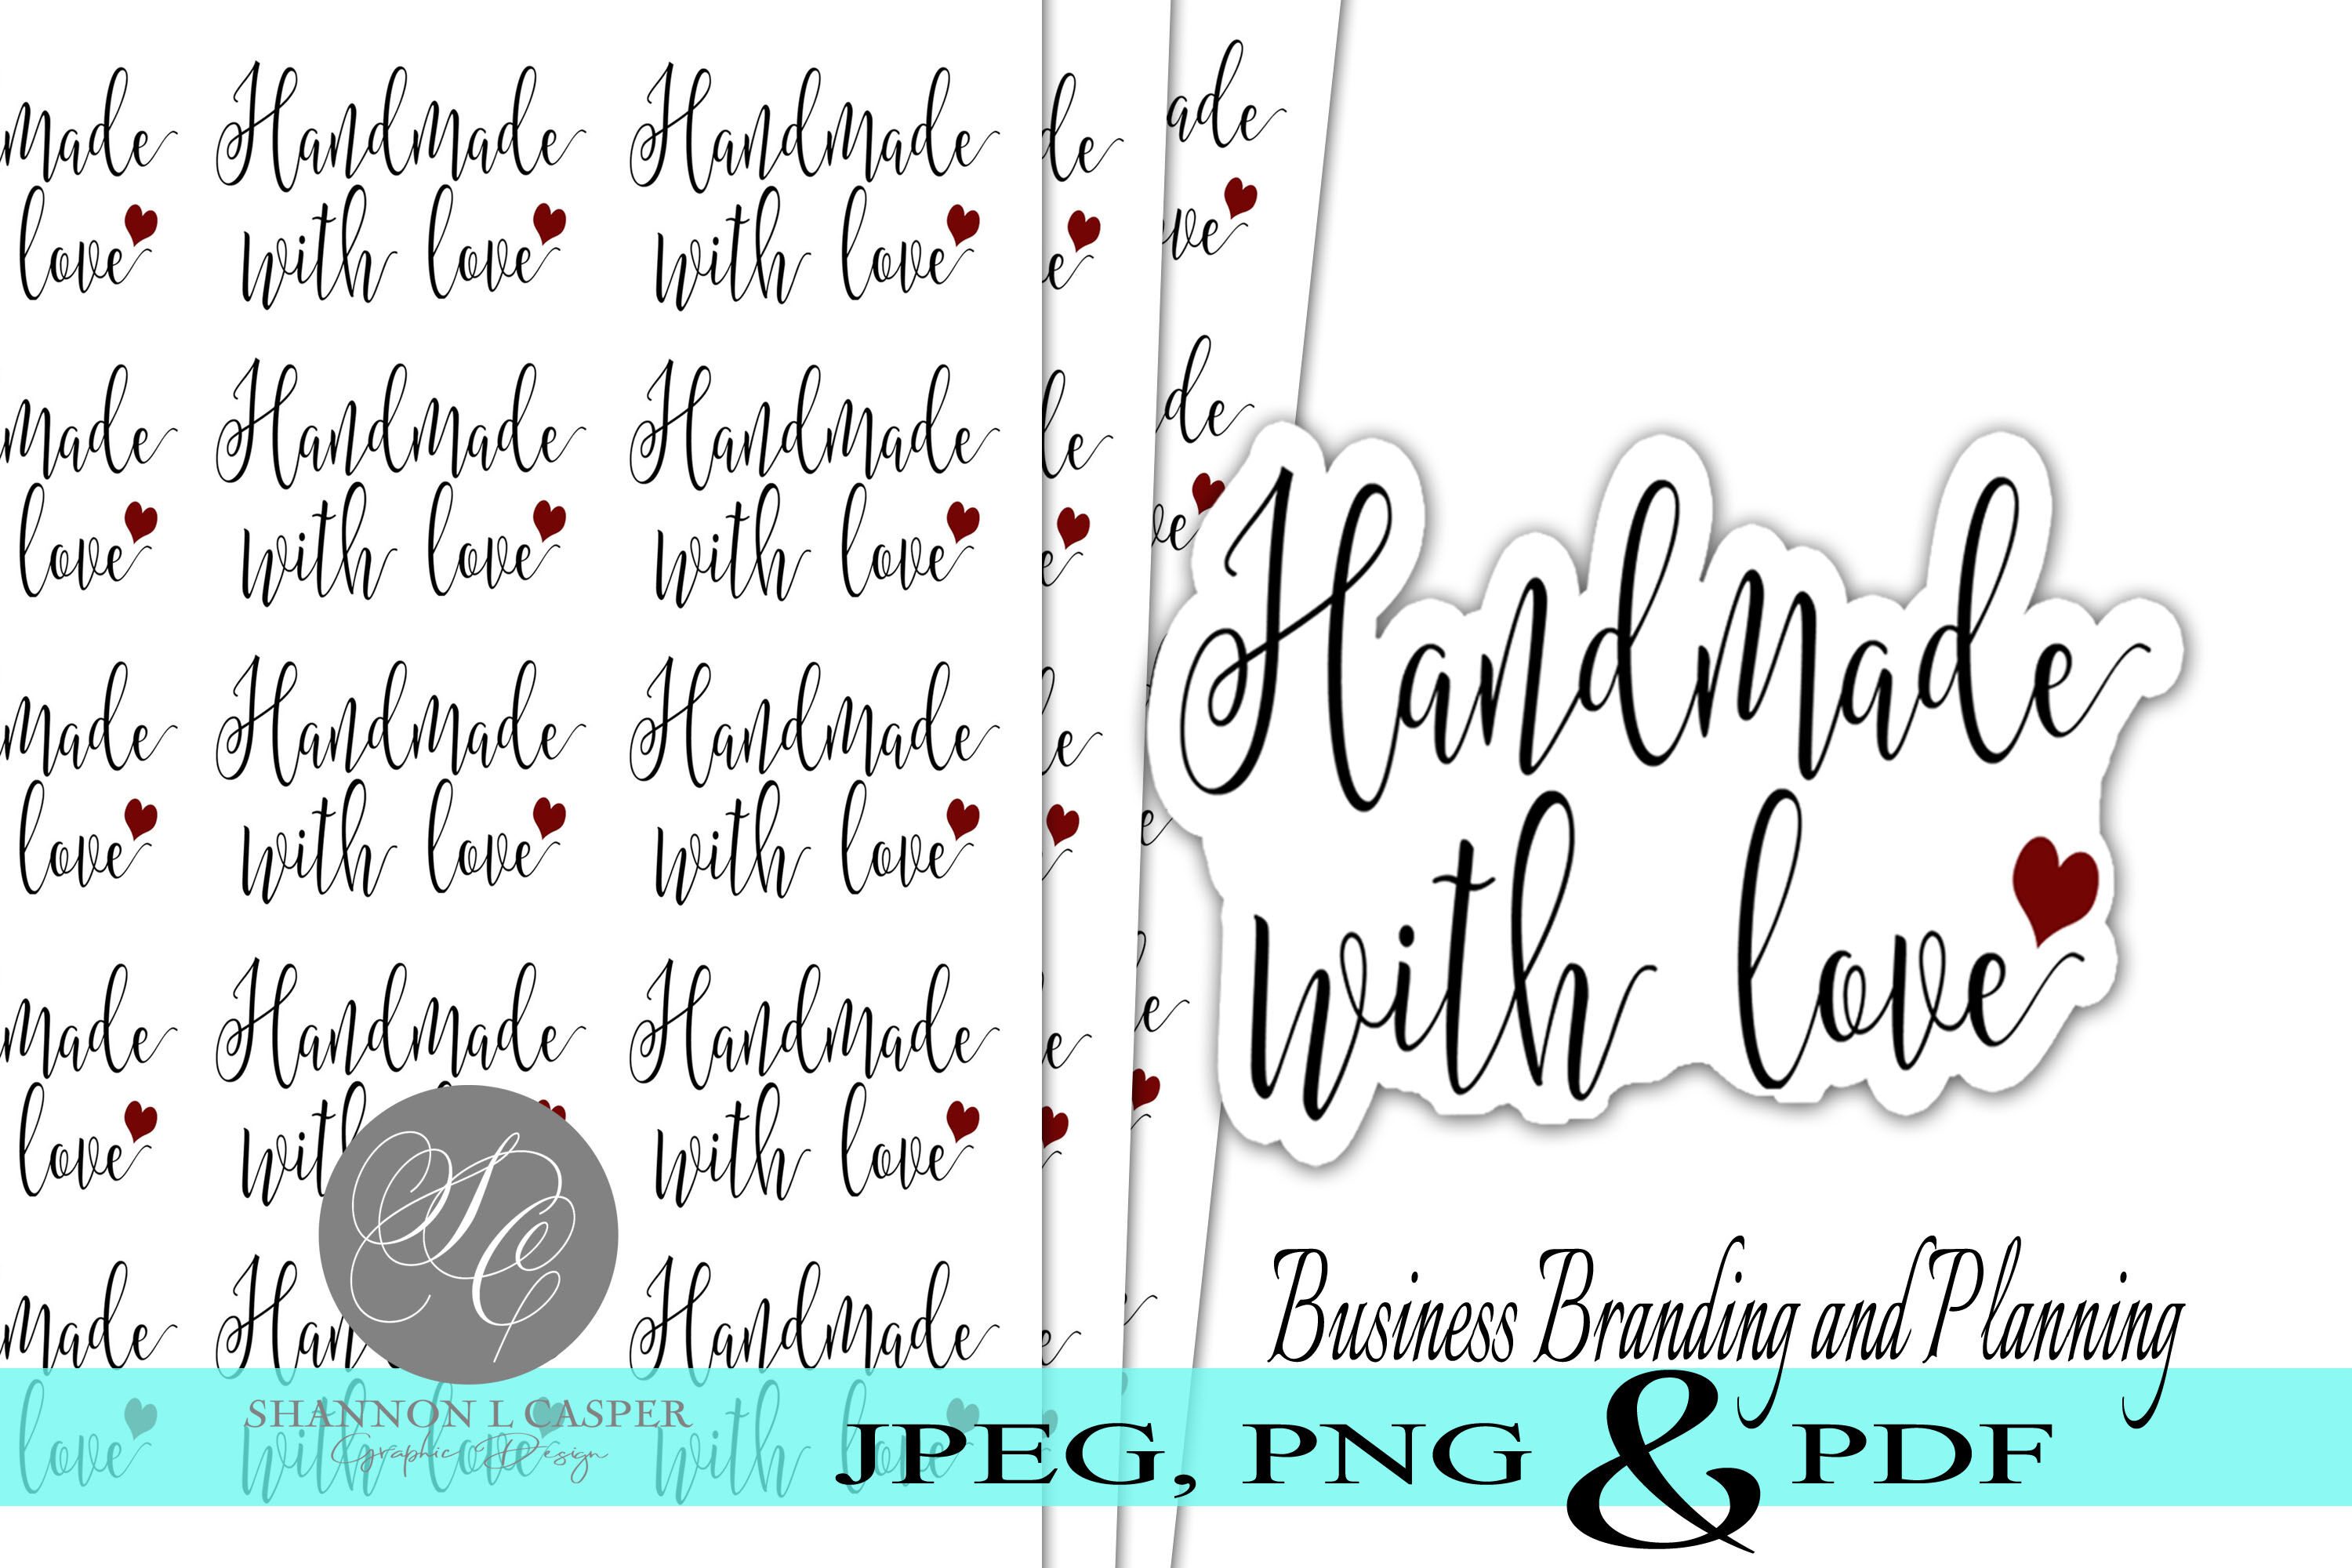 Handmade with Love Tags Template/ Paper Cut Tags SVG